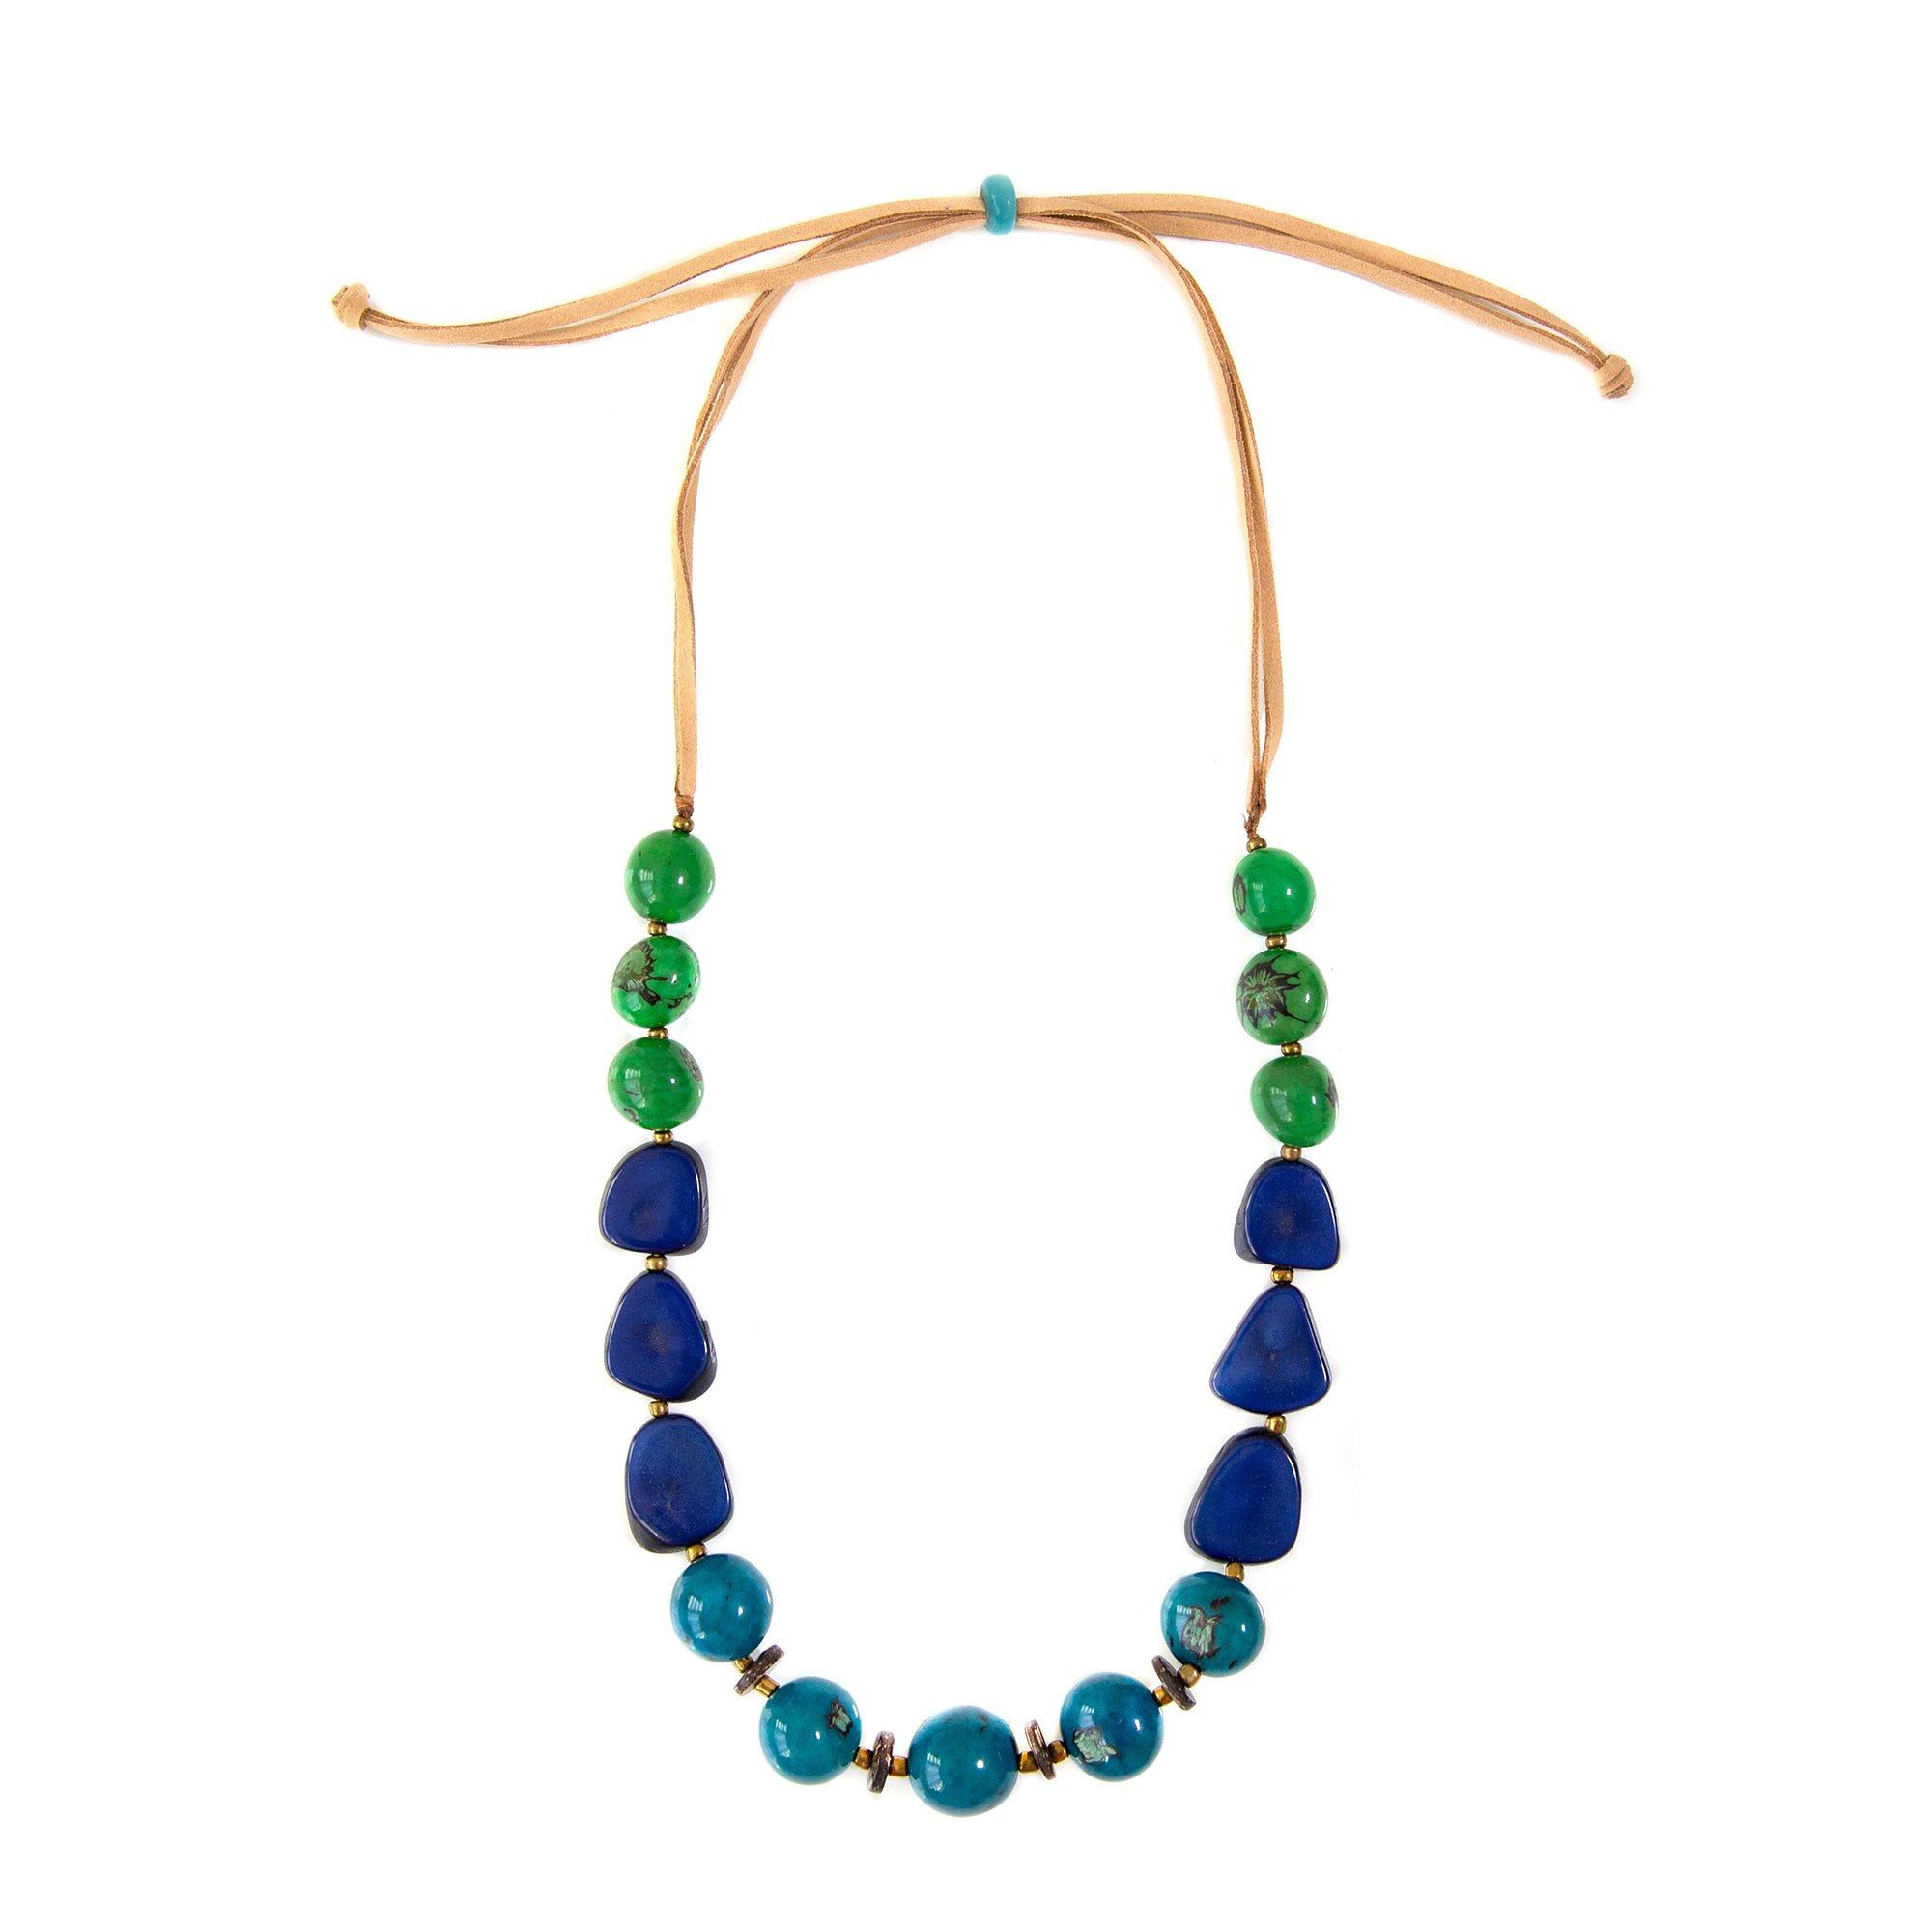 24 In. Organic Beads Adjustable Cord Necklace